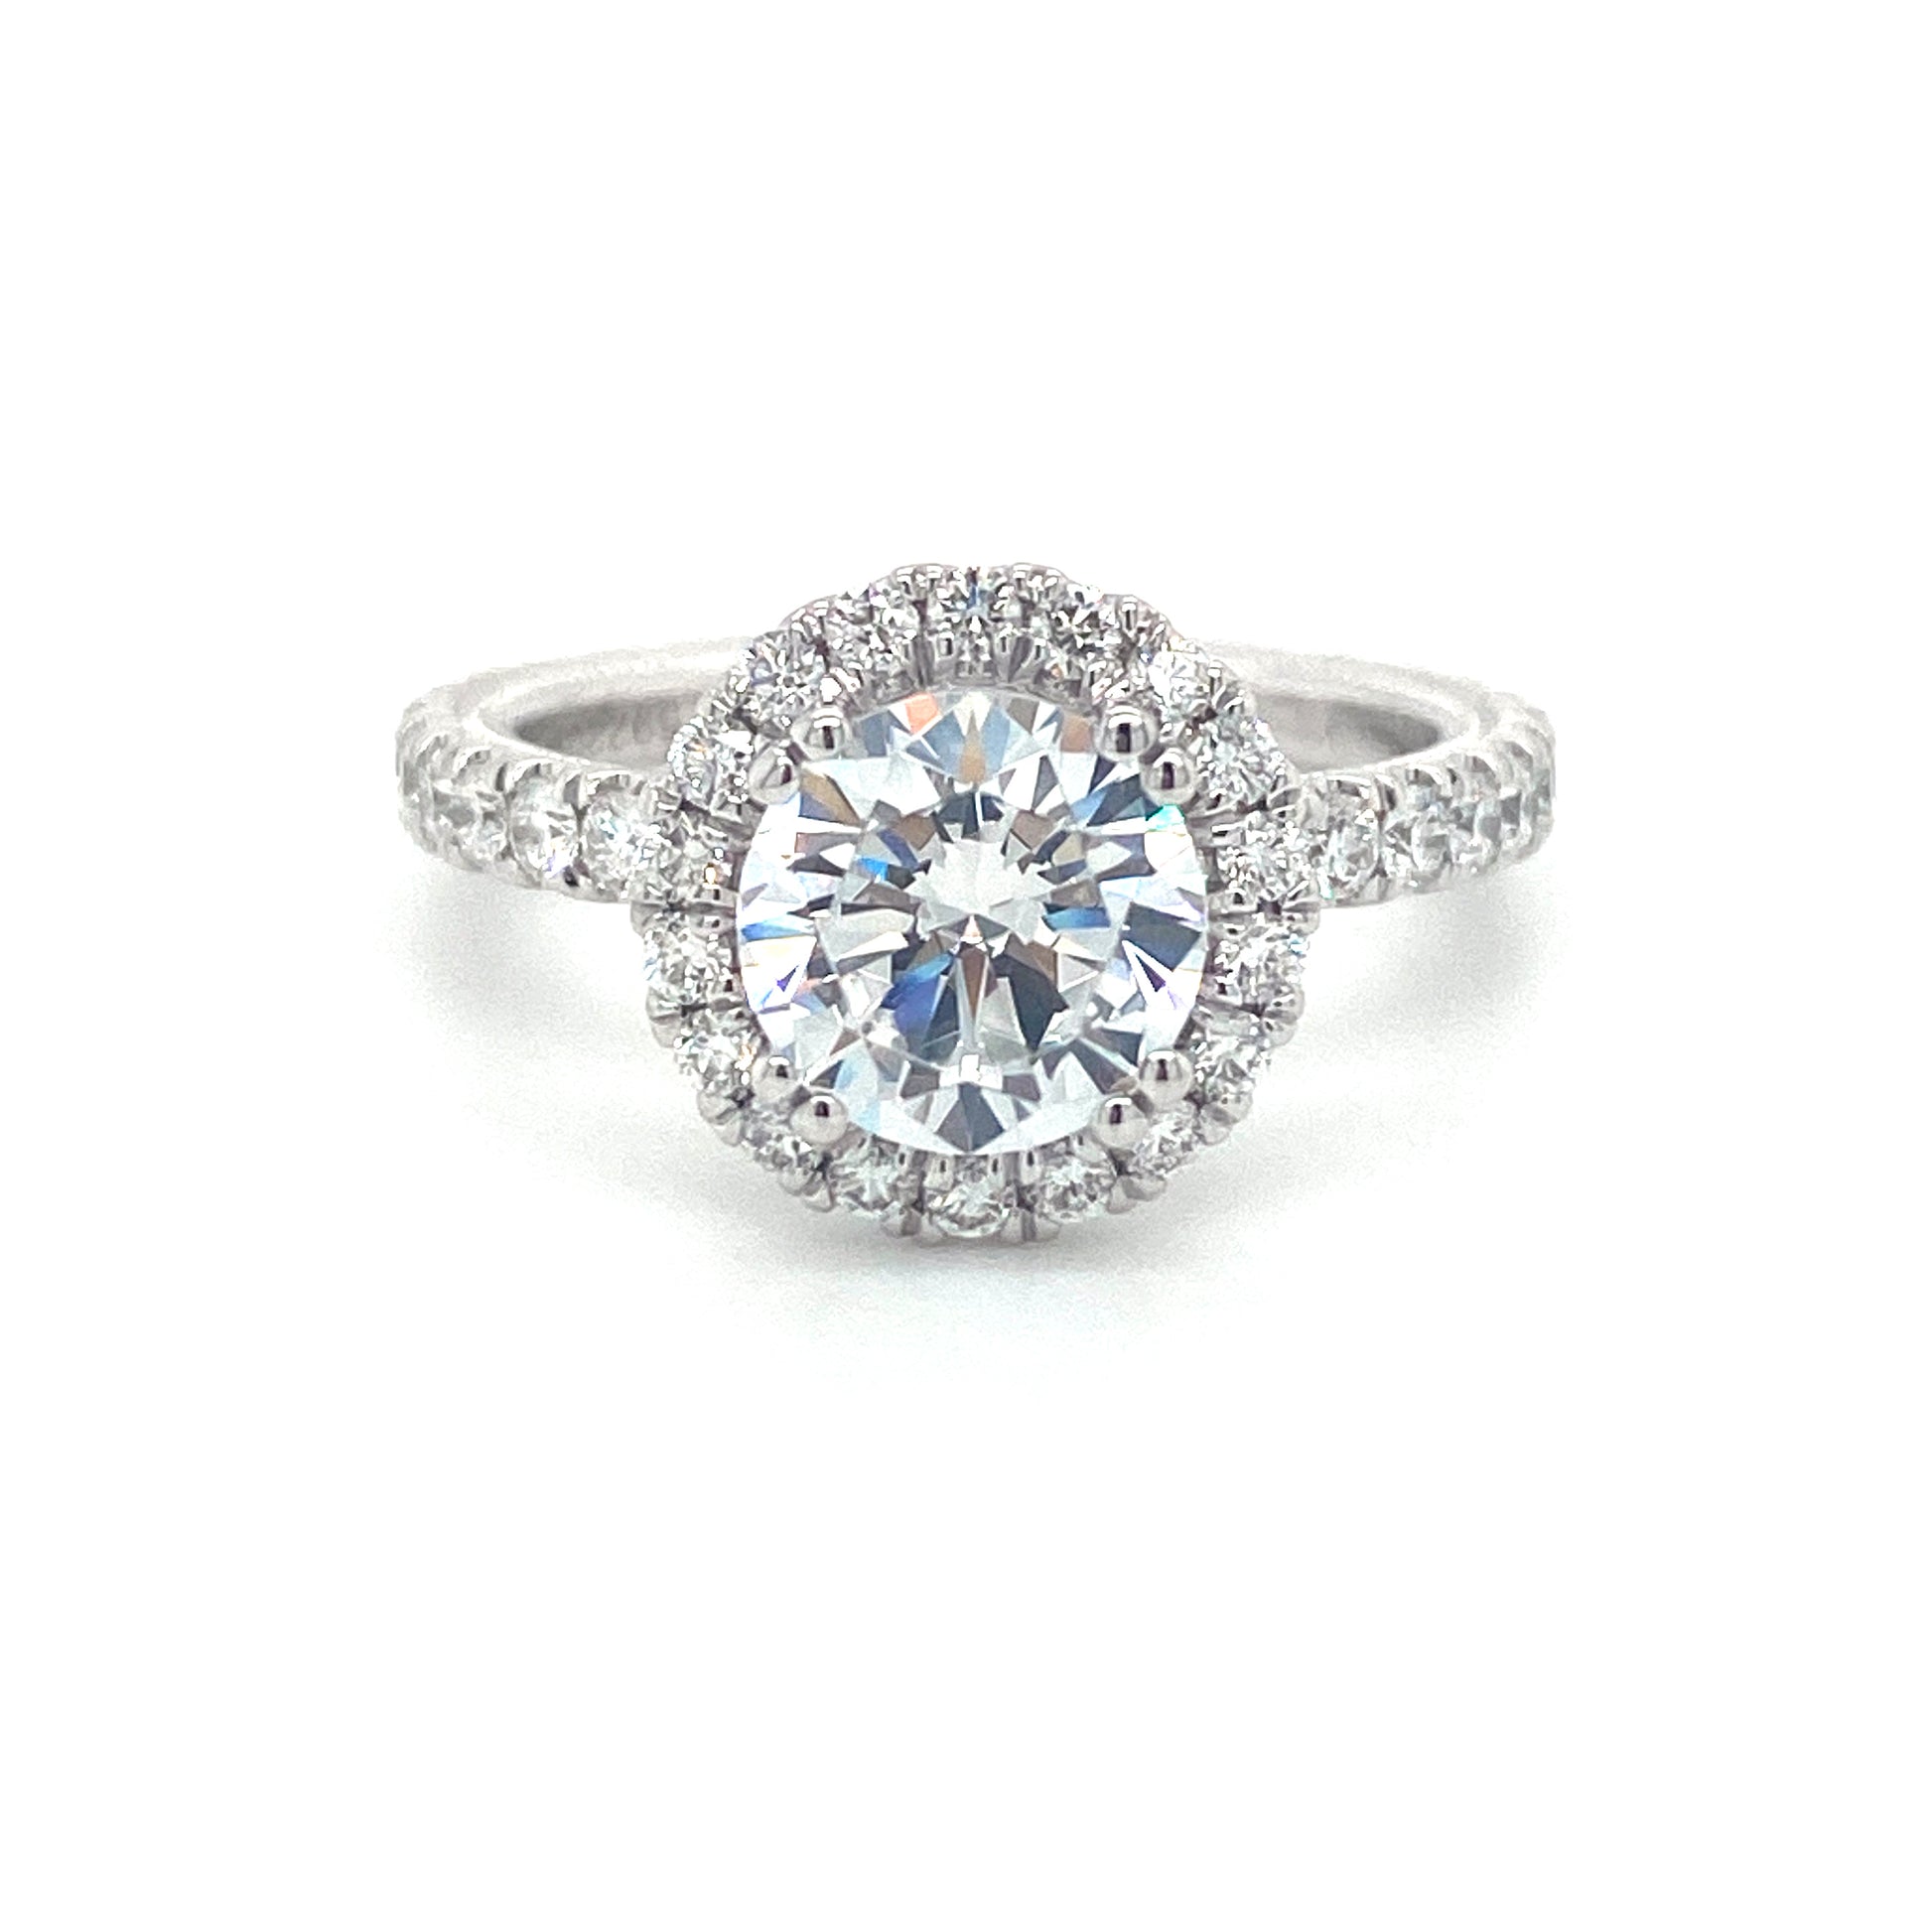 Verragio Tradition Collection White Gold Round Halo Semi-Mount Engagement Ring - Diamond Semi-Mount Rings